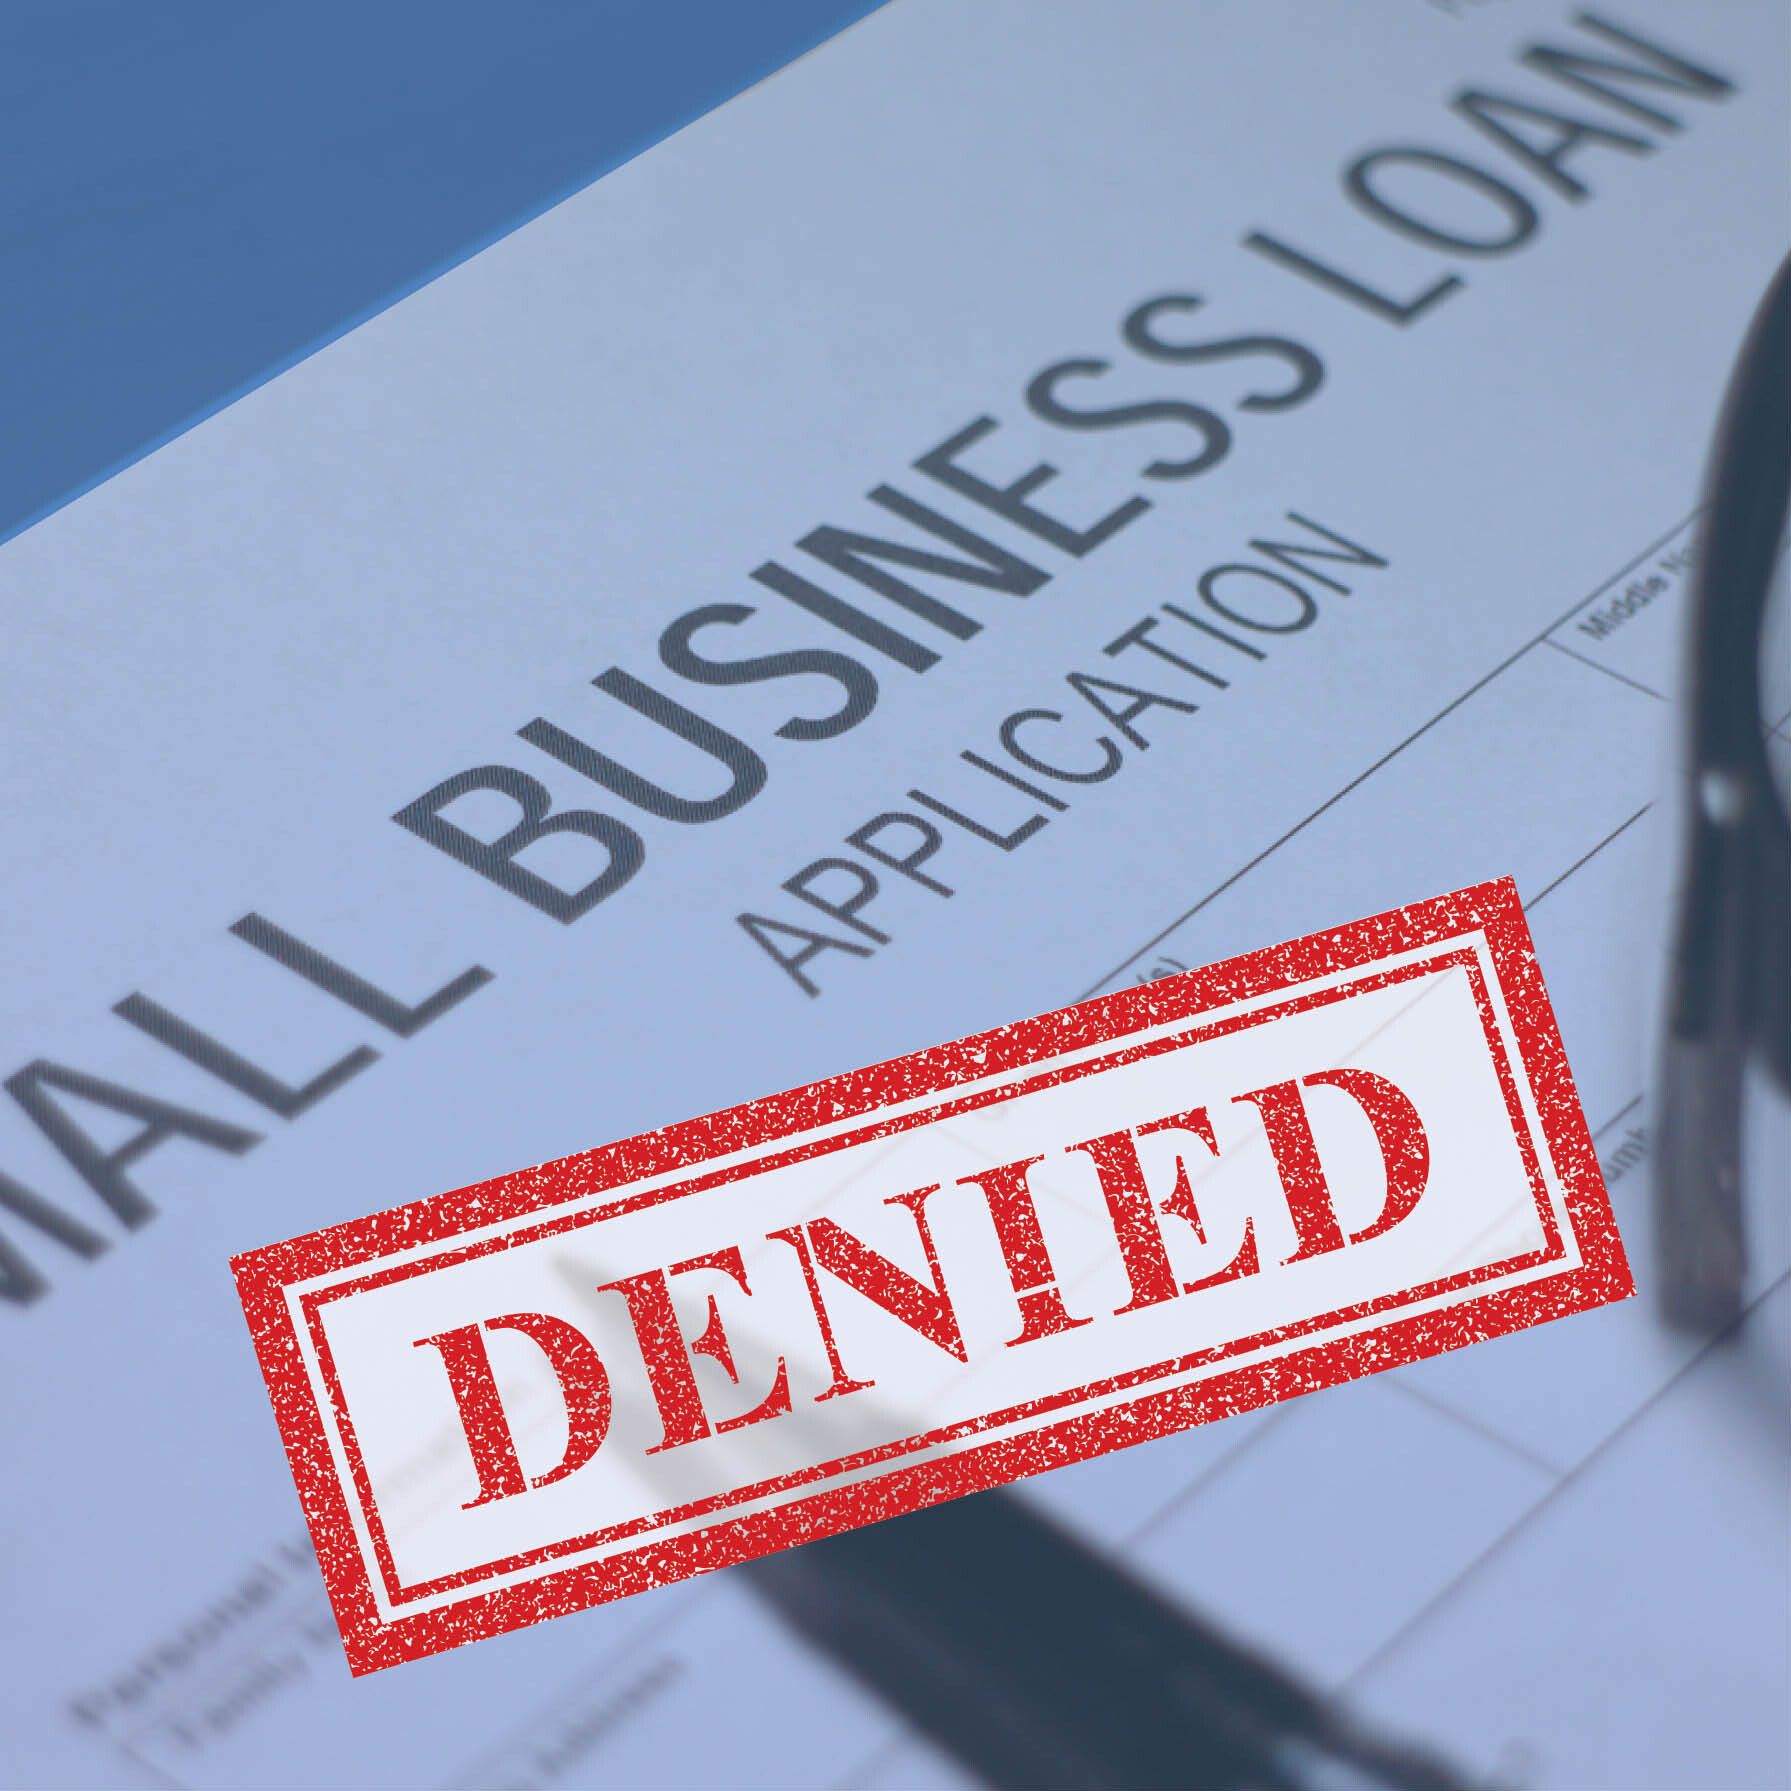 Steps to take if you’ve been denied an SBA loan